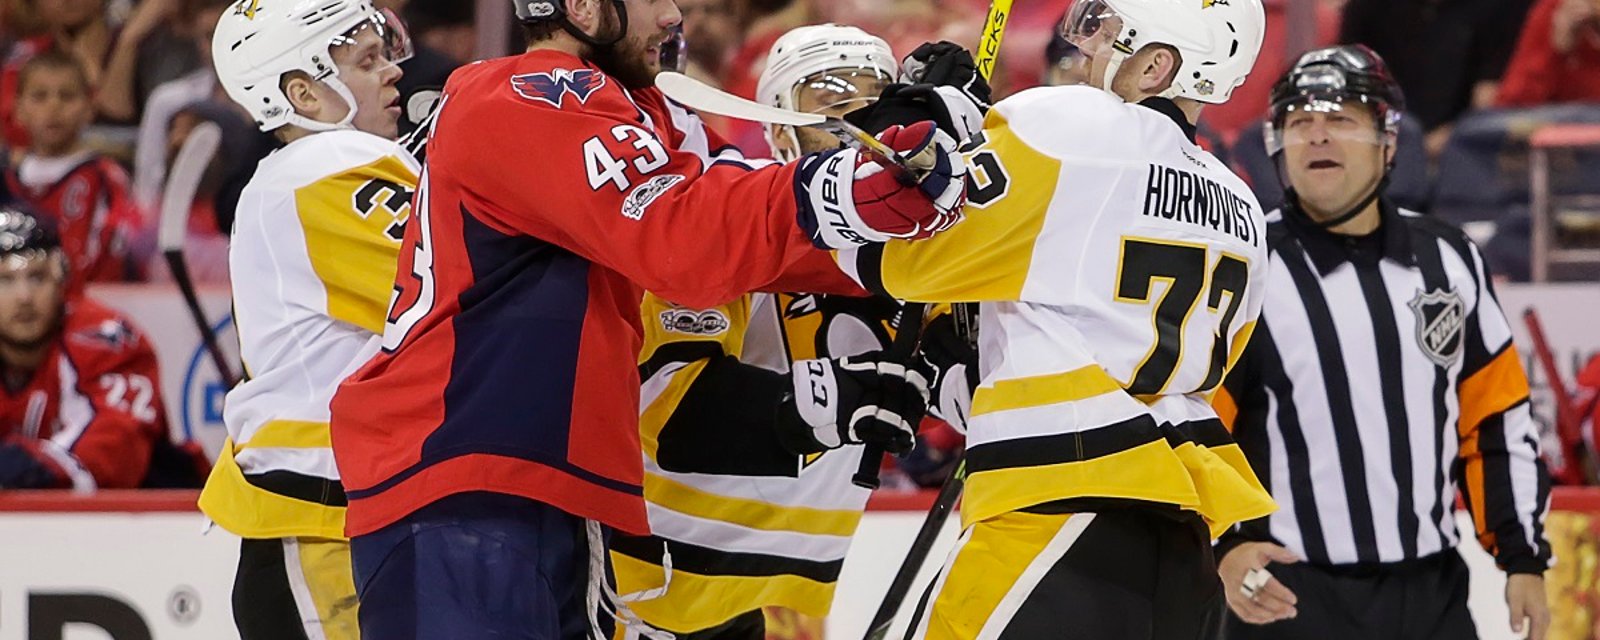 A closer look at the hit that could lead to Tom Wilson's suspension.